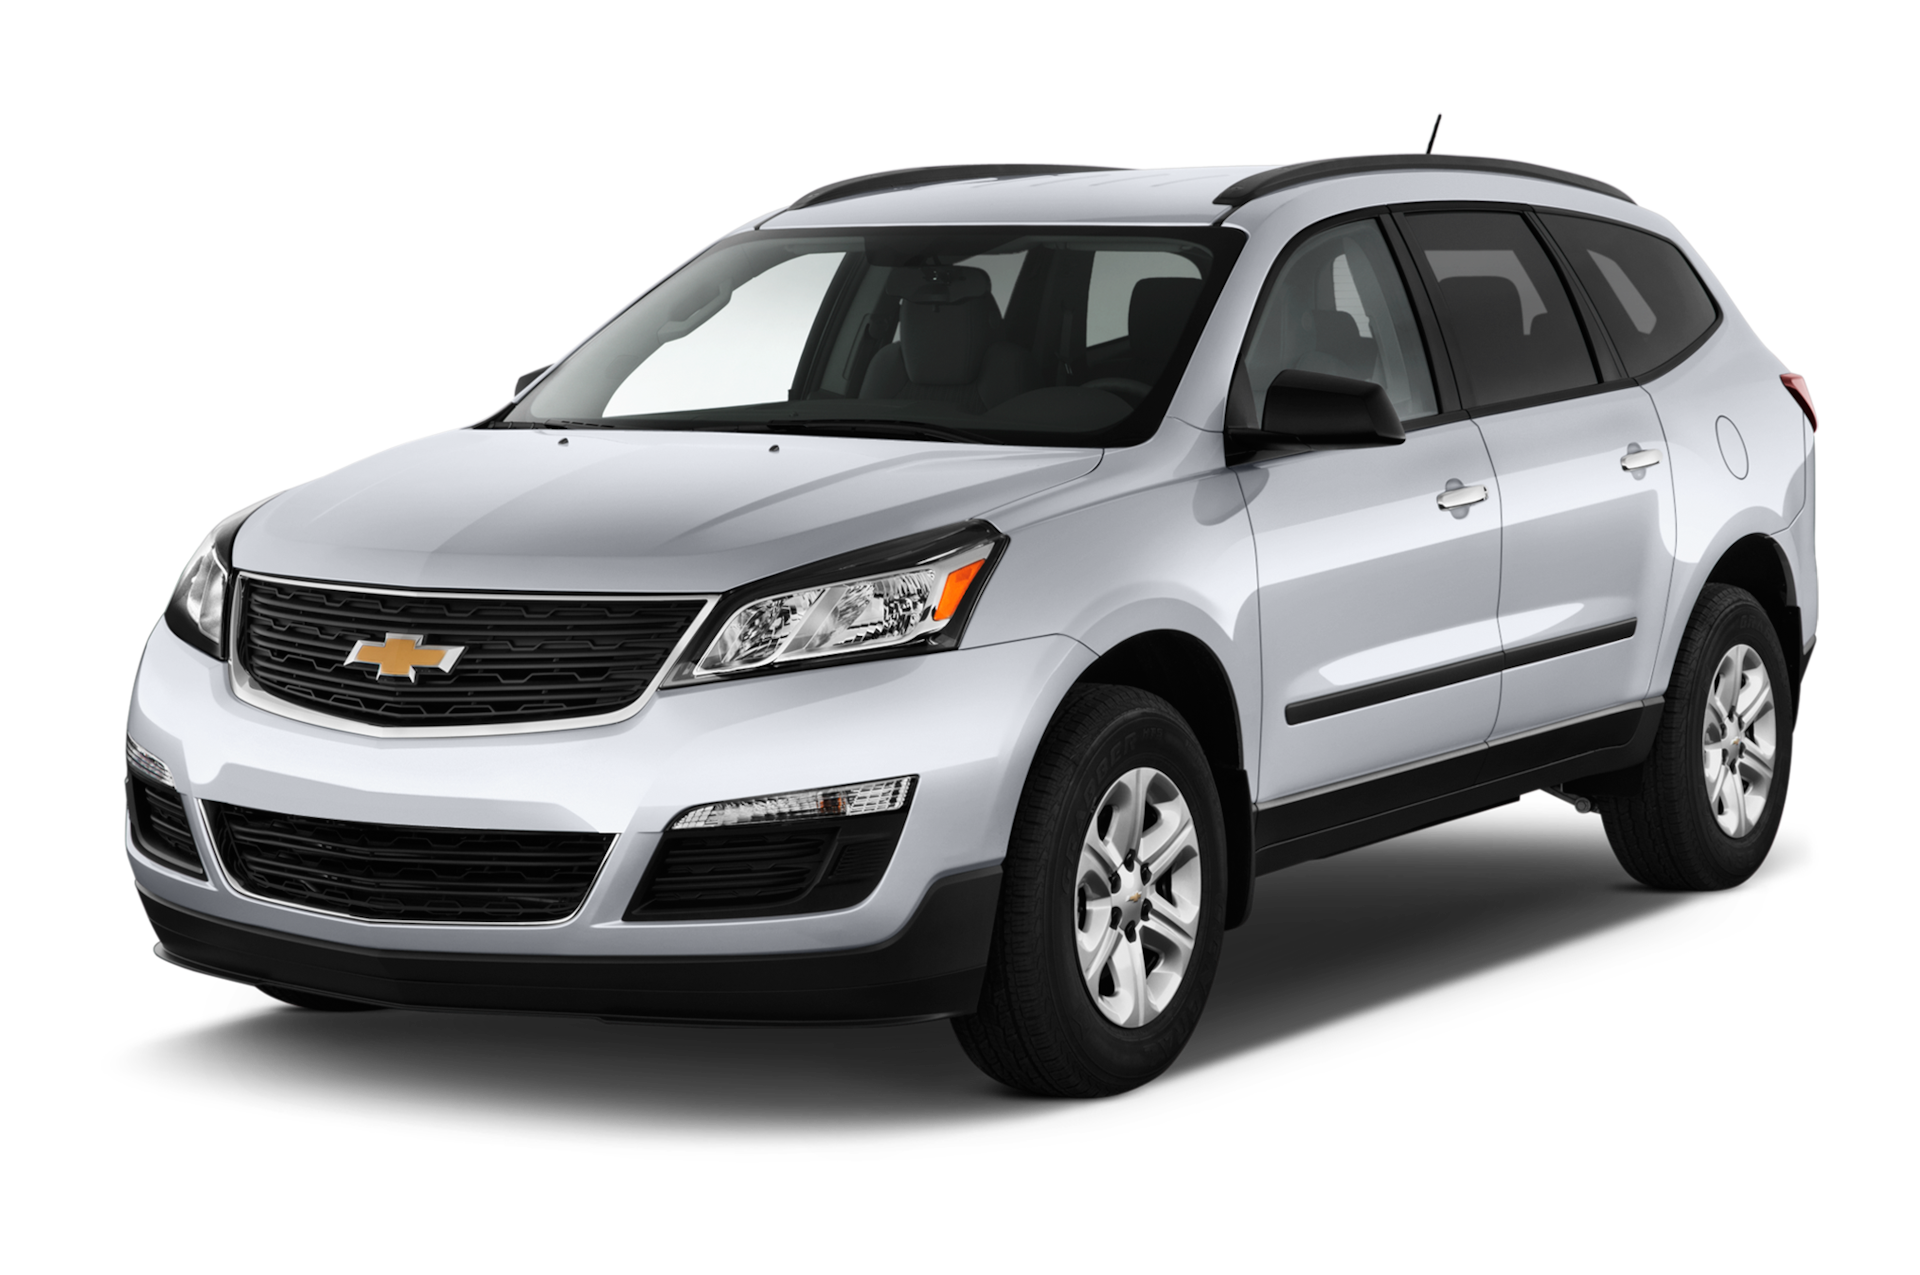 2013 Chevrolet Traverse Prices, Reviews, and Photos - MotorTrend